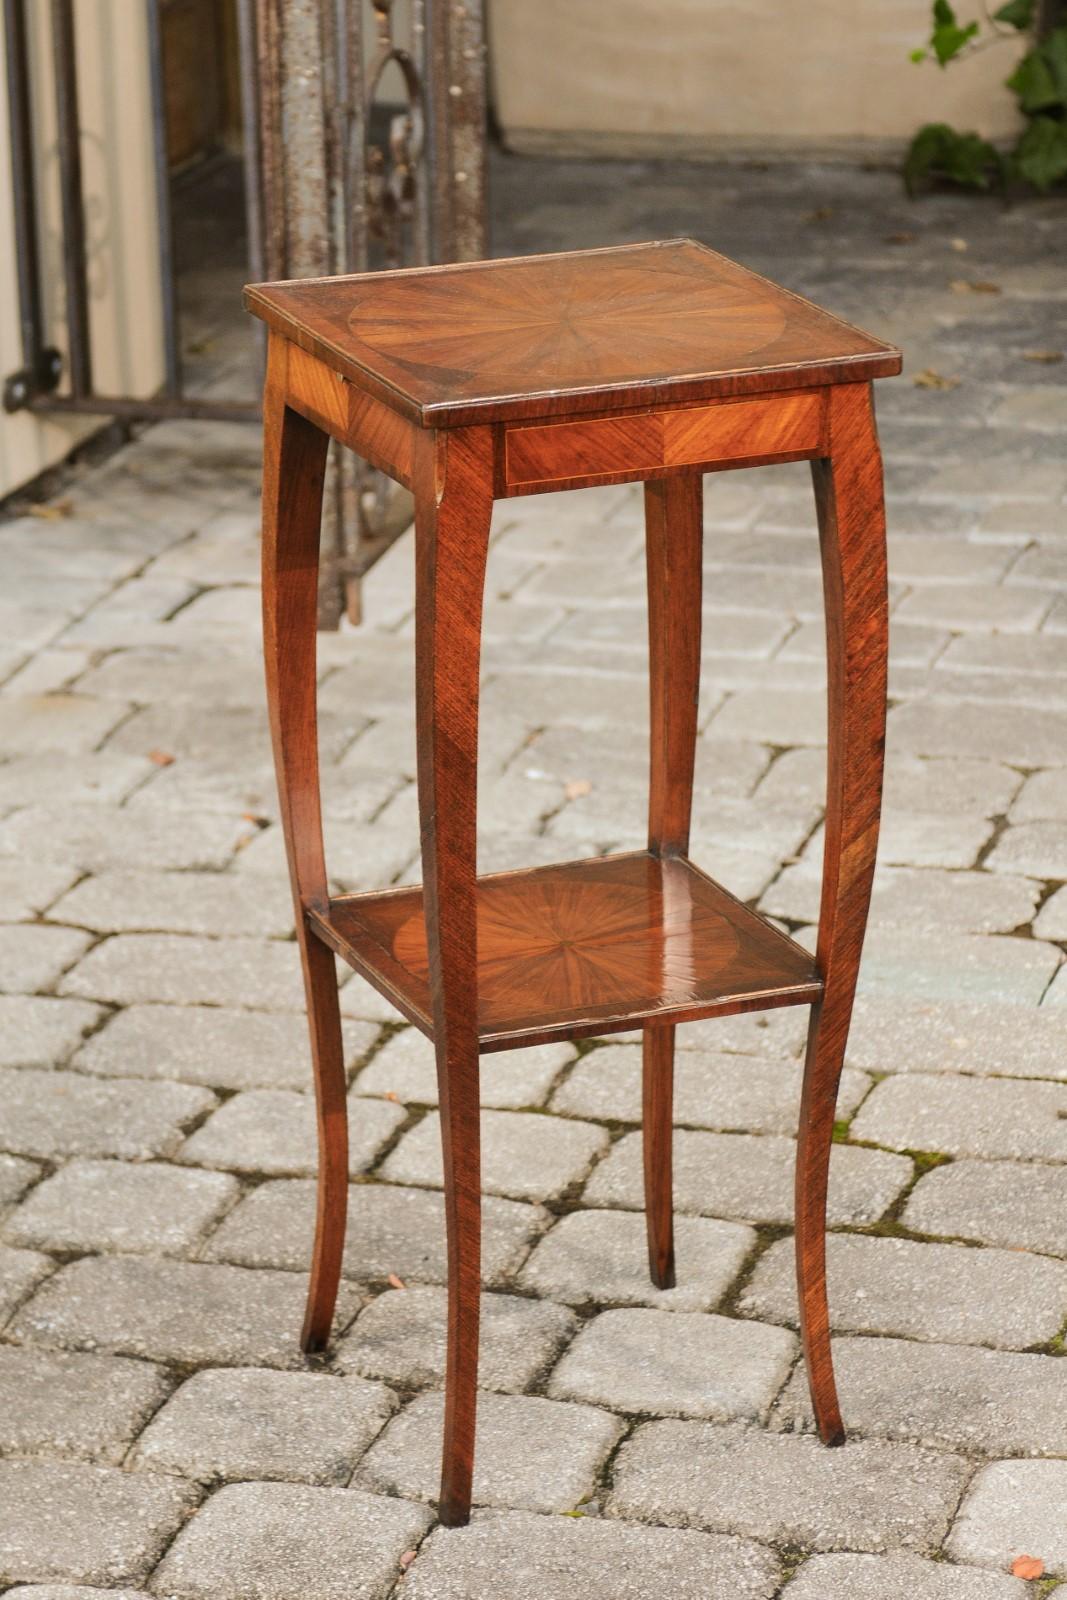 An Italian walnut veneered side table from the early 19th century, with geometrical inlay and pull-out shelf. Born in Italy during the early years of the 19th century, this exquisite side table features a square top, adorned in its center with a